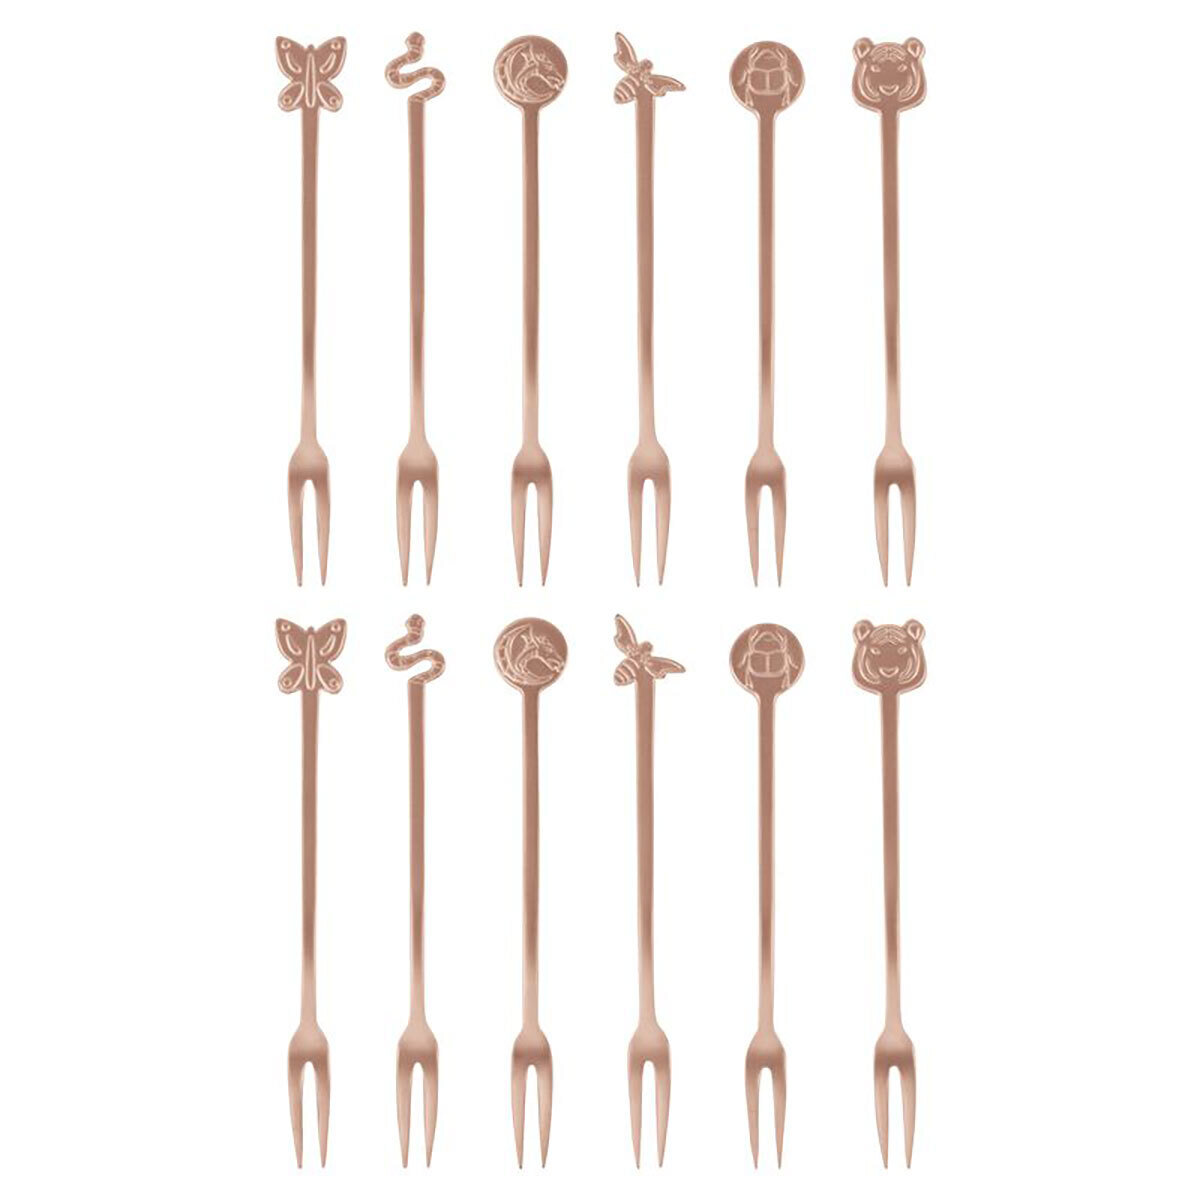 Sambonet Party Fashion Party Forks 12 Piece Giftboxed 52649R53